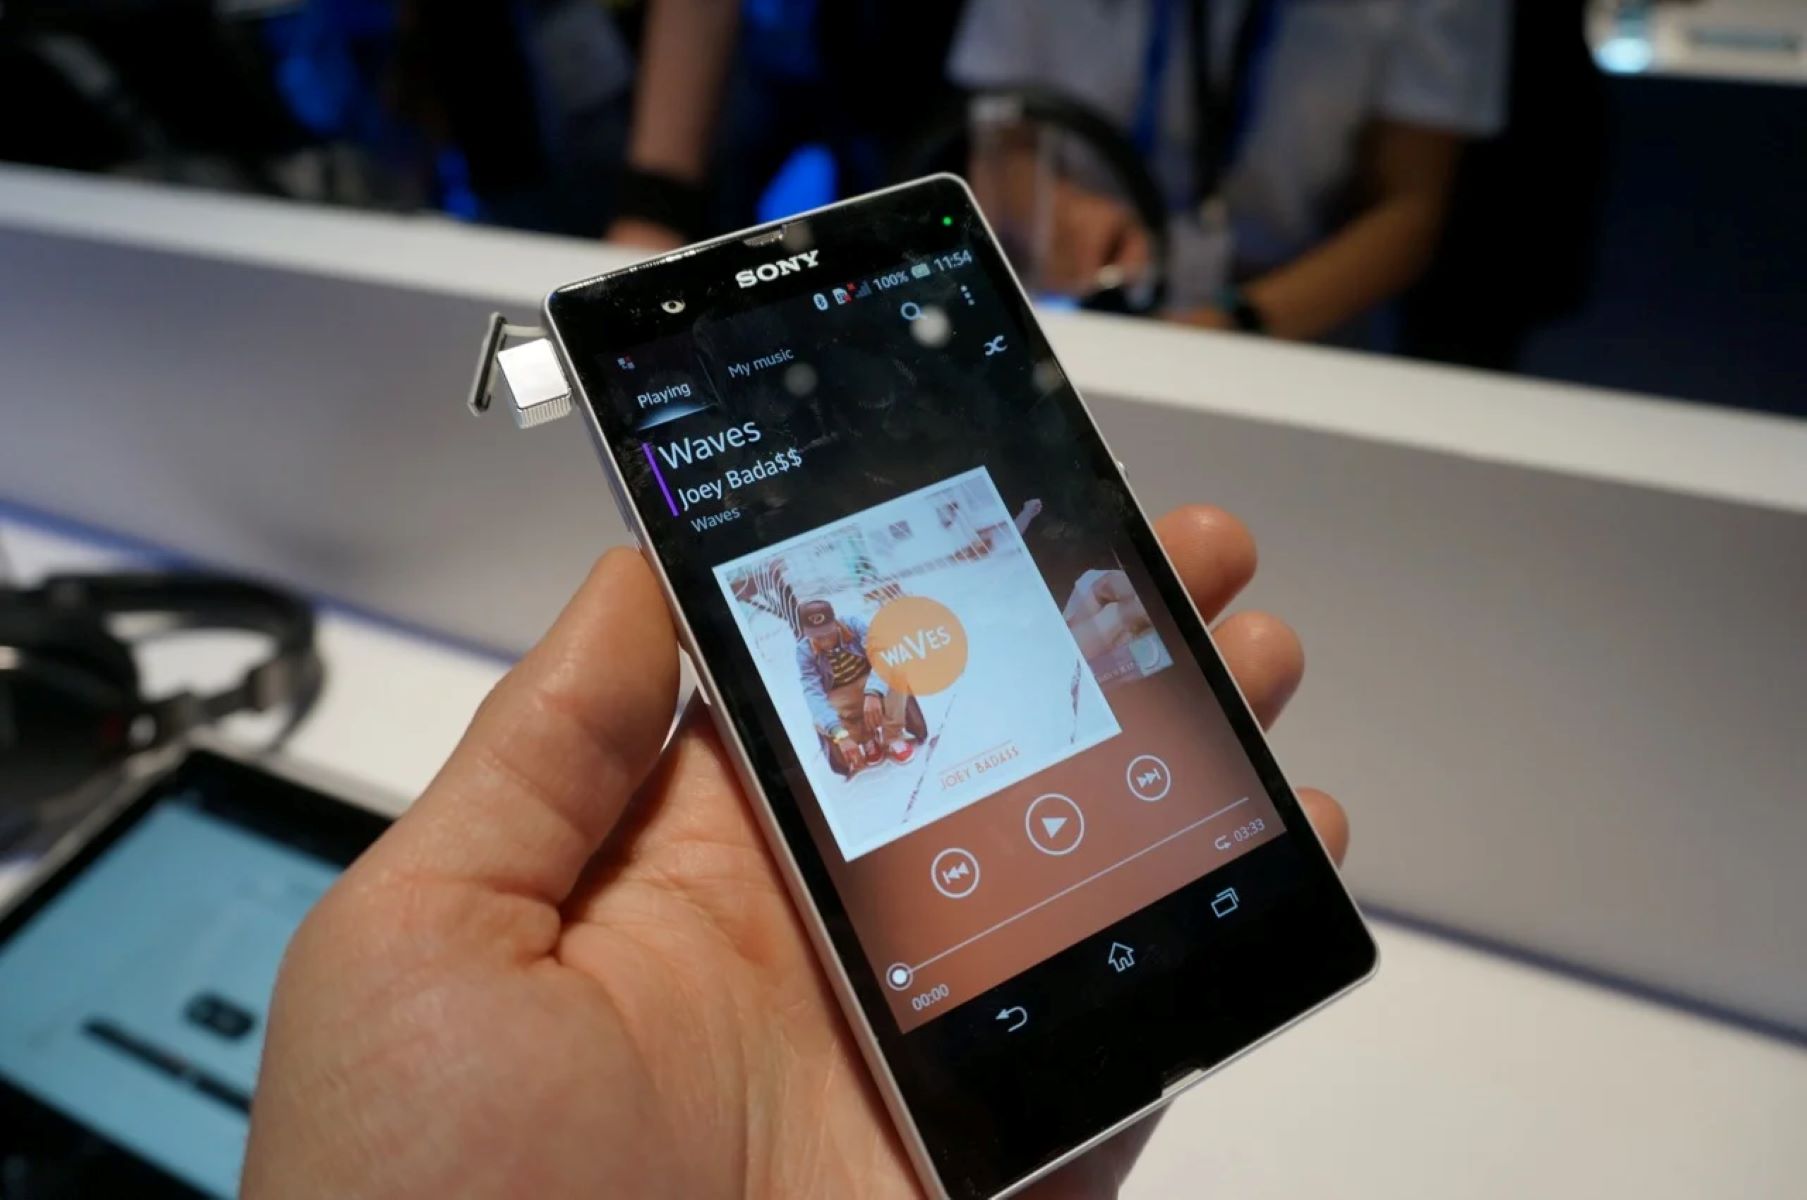 A Guide To Downloading Music On Sony Xperia Devices